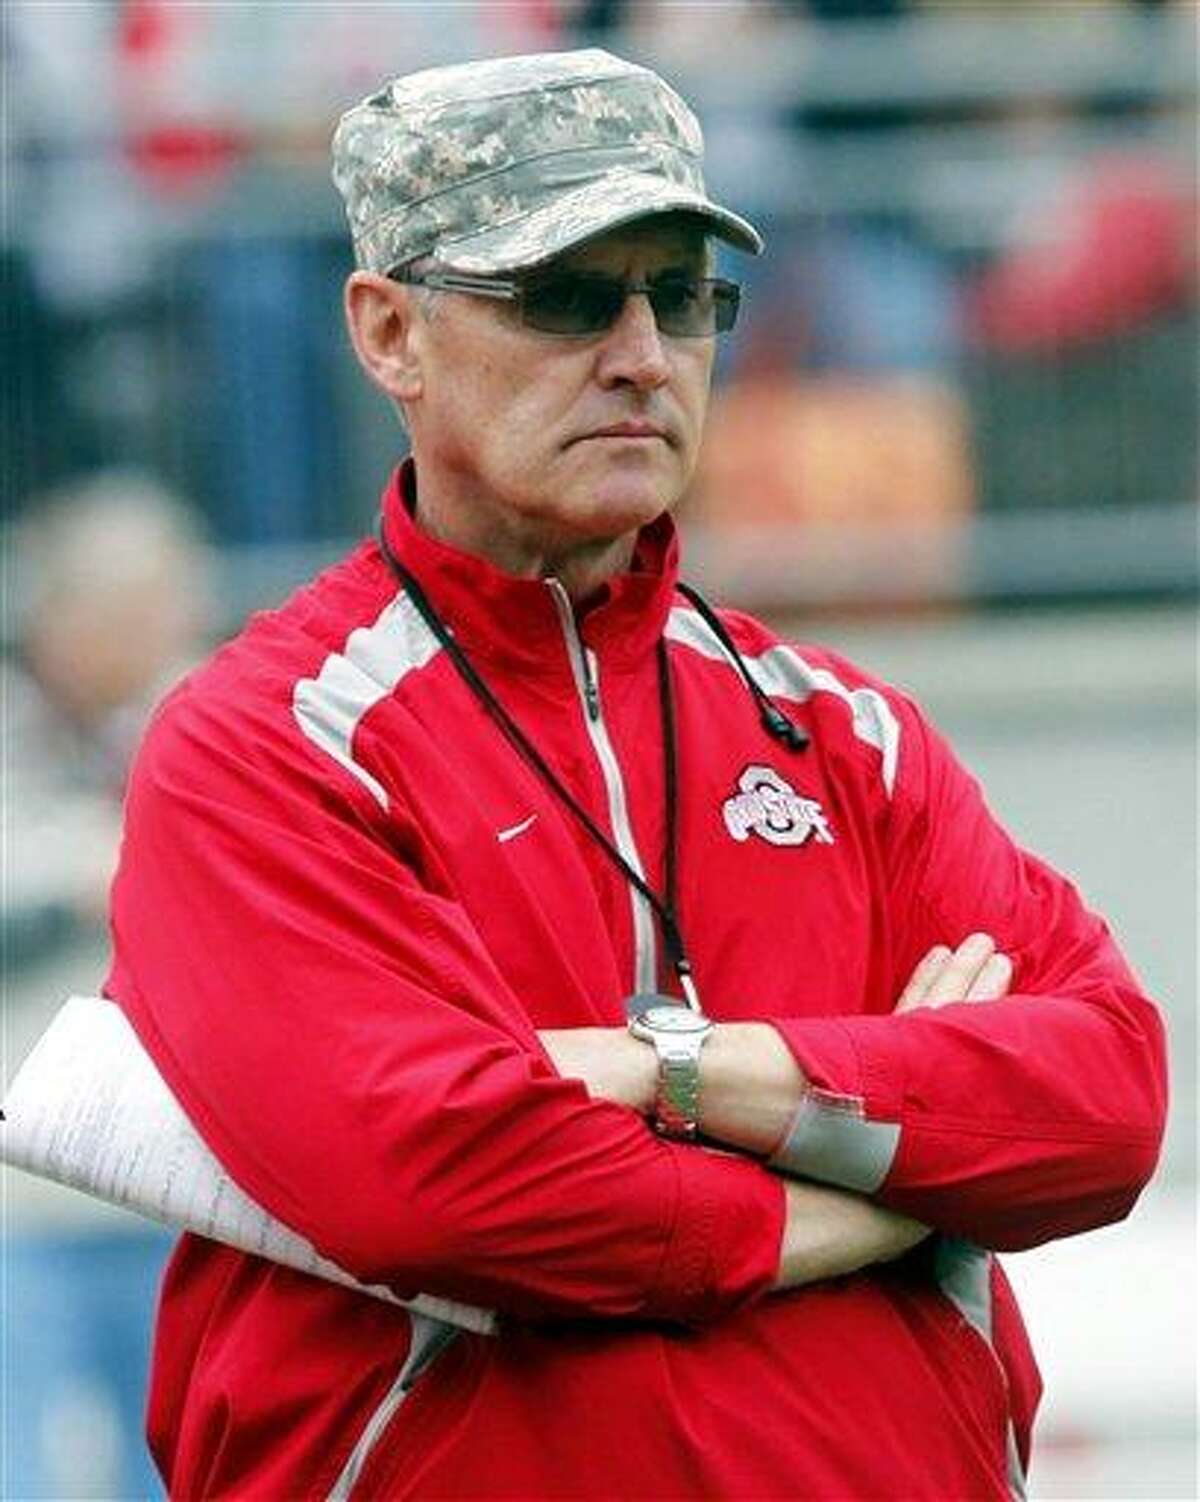 FILE - This April 23, 2011, file photo shows Ohio State head coach Jim Tressel during an NCAA college football Spring Game, in Columbus, Ohio. The NCAA is accusing Tressel of lying to hide violations by players who traded memorabilia for cash and tattoos. The governing body says these are 'potential major violations,' and the school must go before the NCAA on Aug. 12. (AP Photo/Terry Gilliam, File)